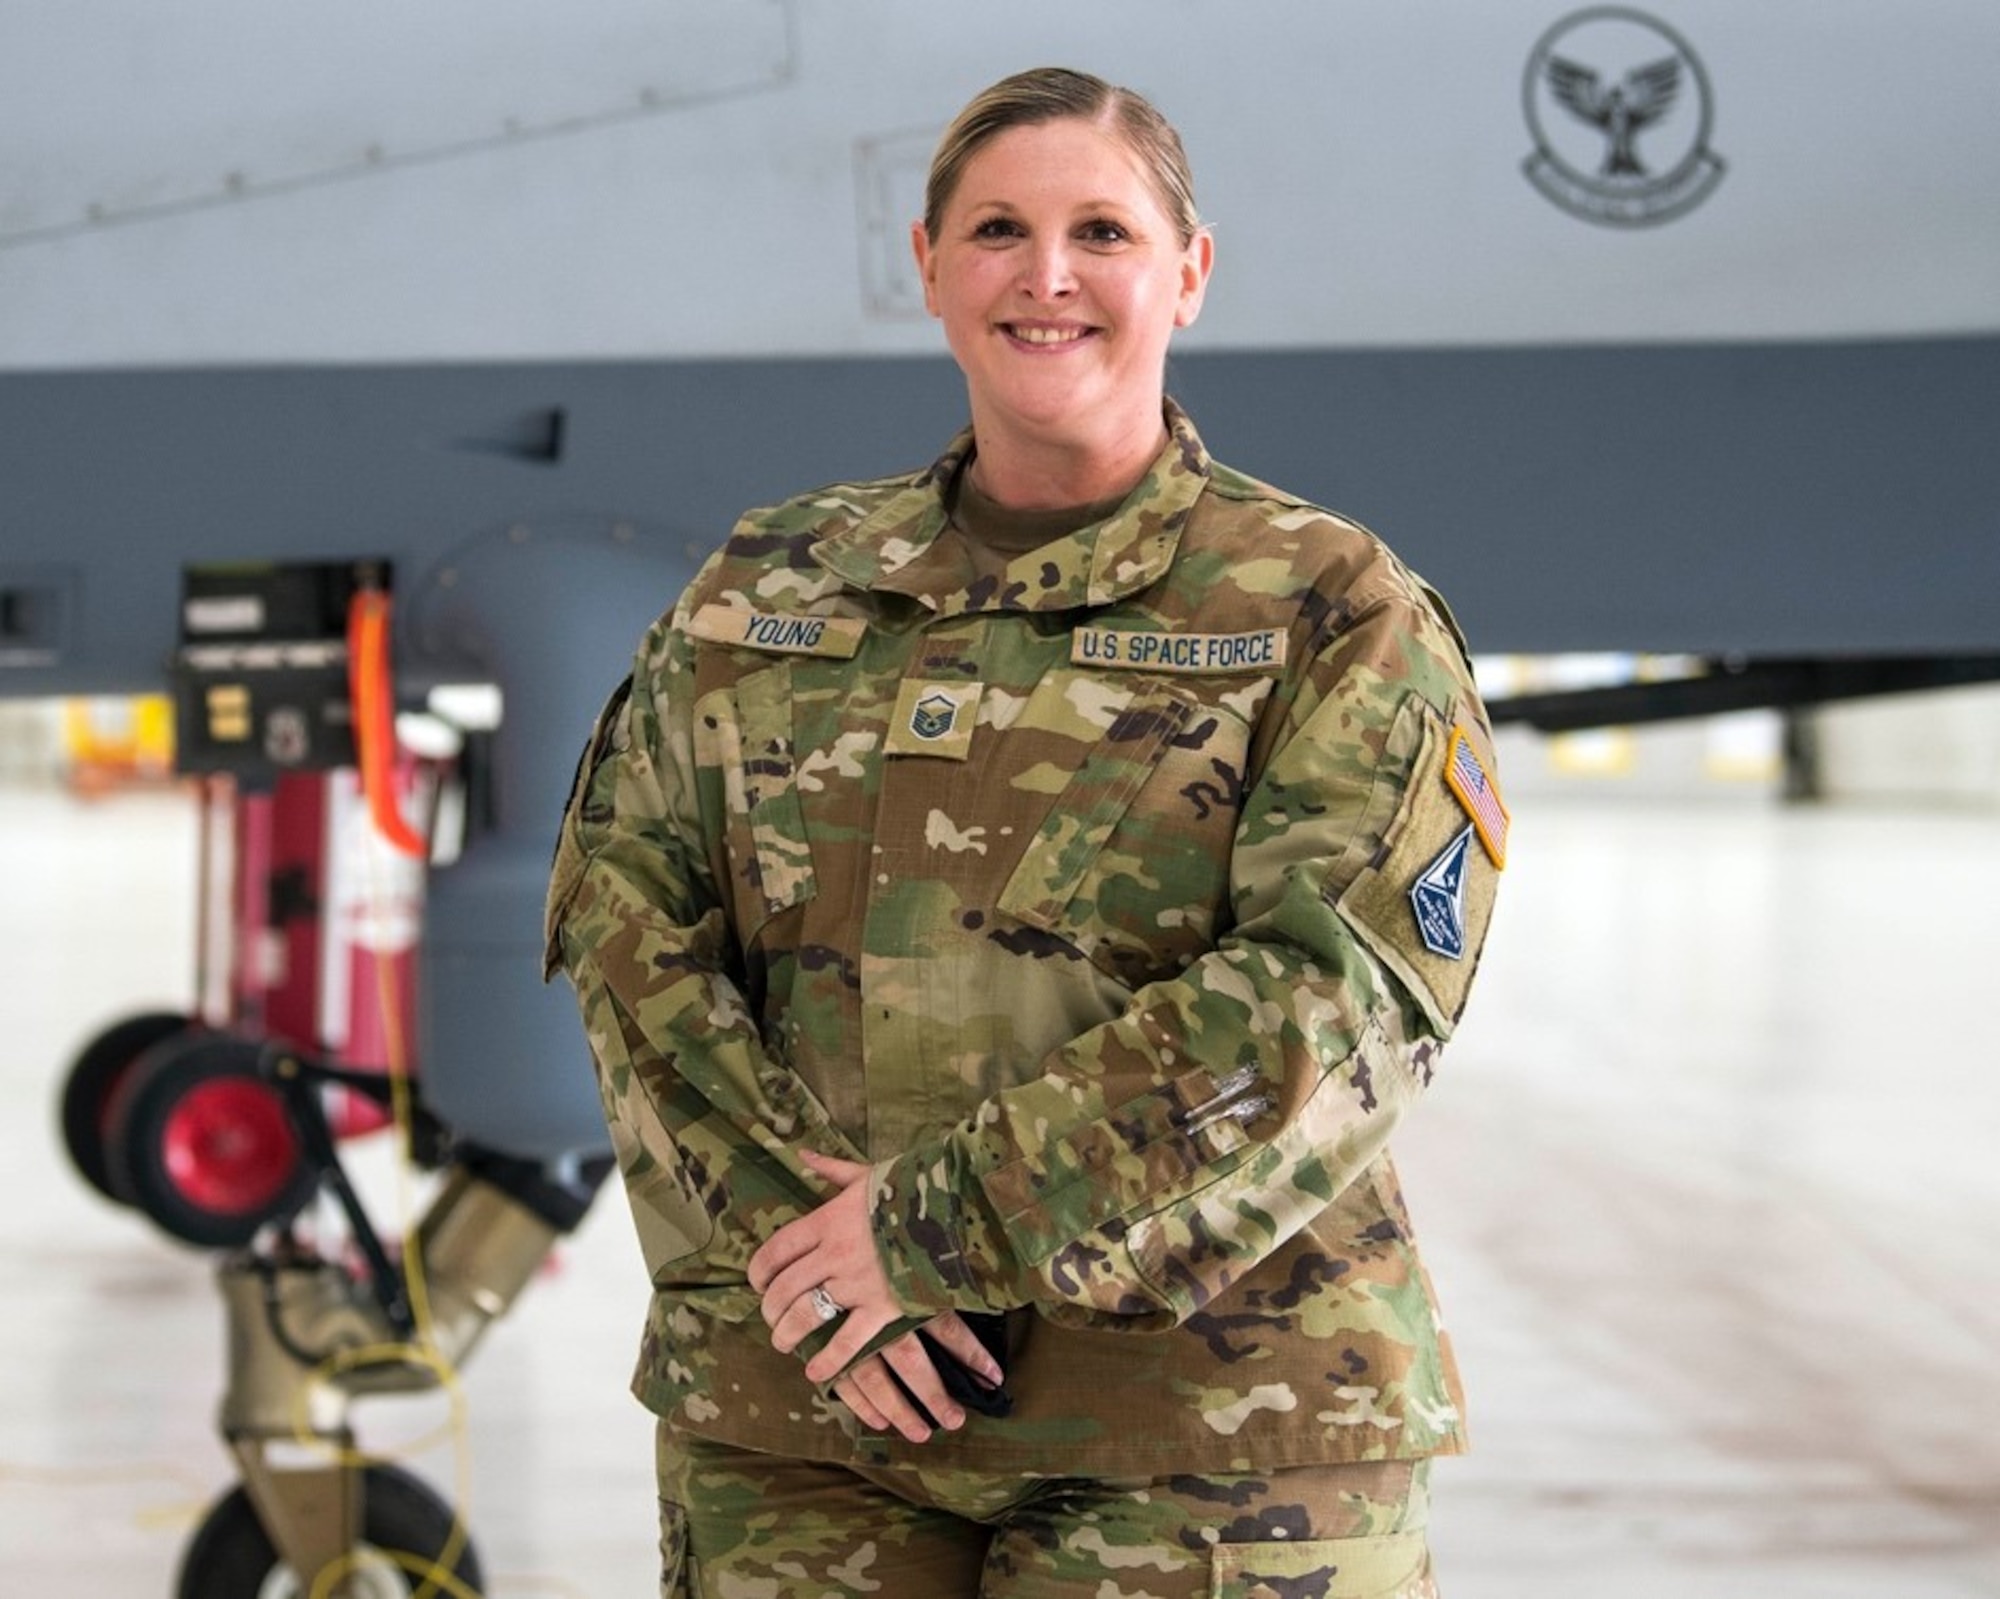 U.S. Space Force Master Sgt. Brittani Young, 49th Communications Squadron, poses for a photo, Feb. 12, 2021, on Holloman Air Force Base, New Mexico. The USSF is currently working on transferring over 6,000 Airmen from the Air Force to the Space Force by mid-2021. In Sept. 2020, the Air Force transitioned more than 2,400 active-duty Airmen in space operations and space system operations to begin establishing, maintaining, and preserving U.S. freedom of operations in space. (U.S. Air Force photo by Airman 1st Class Jessica Sanchez)